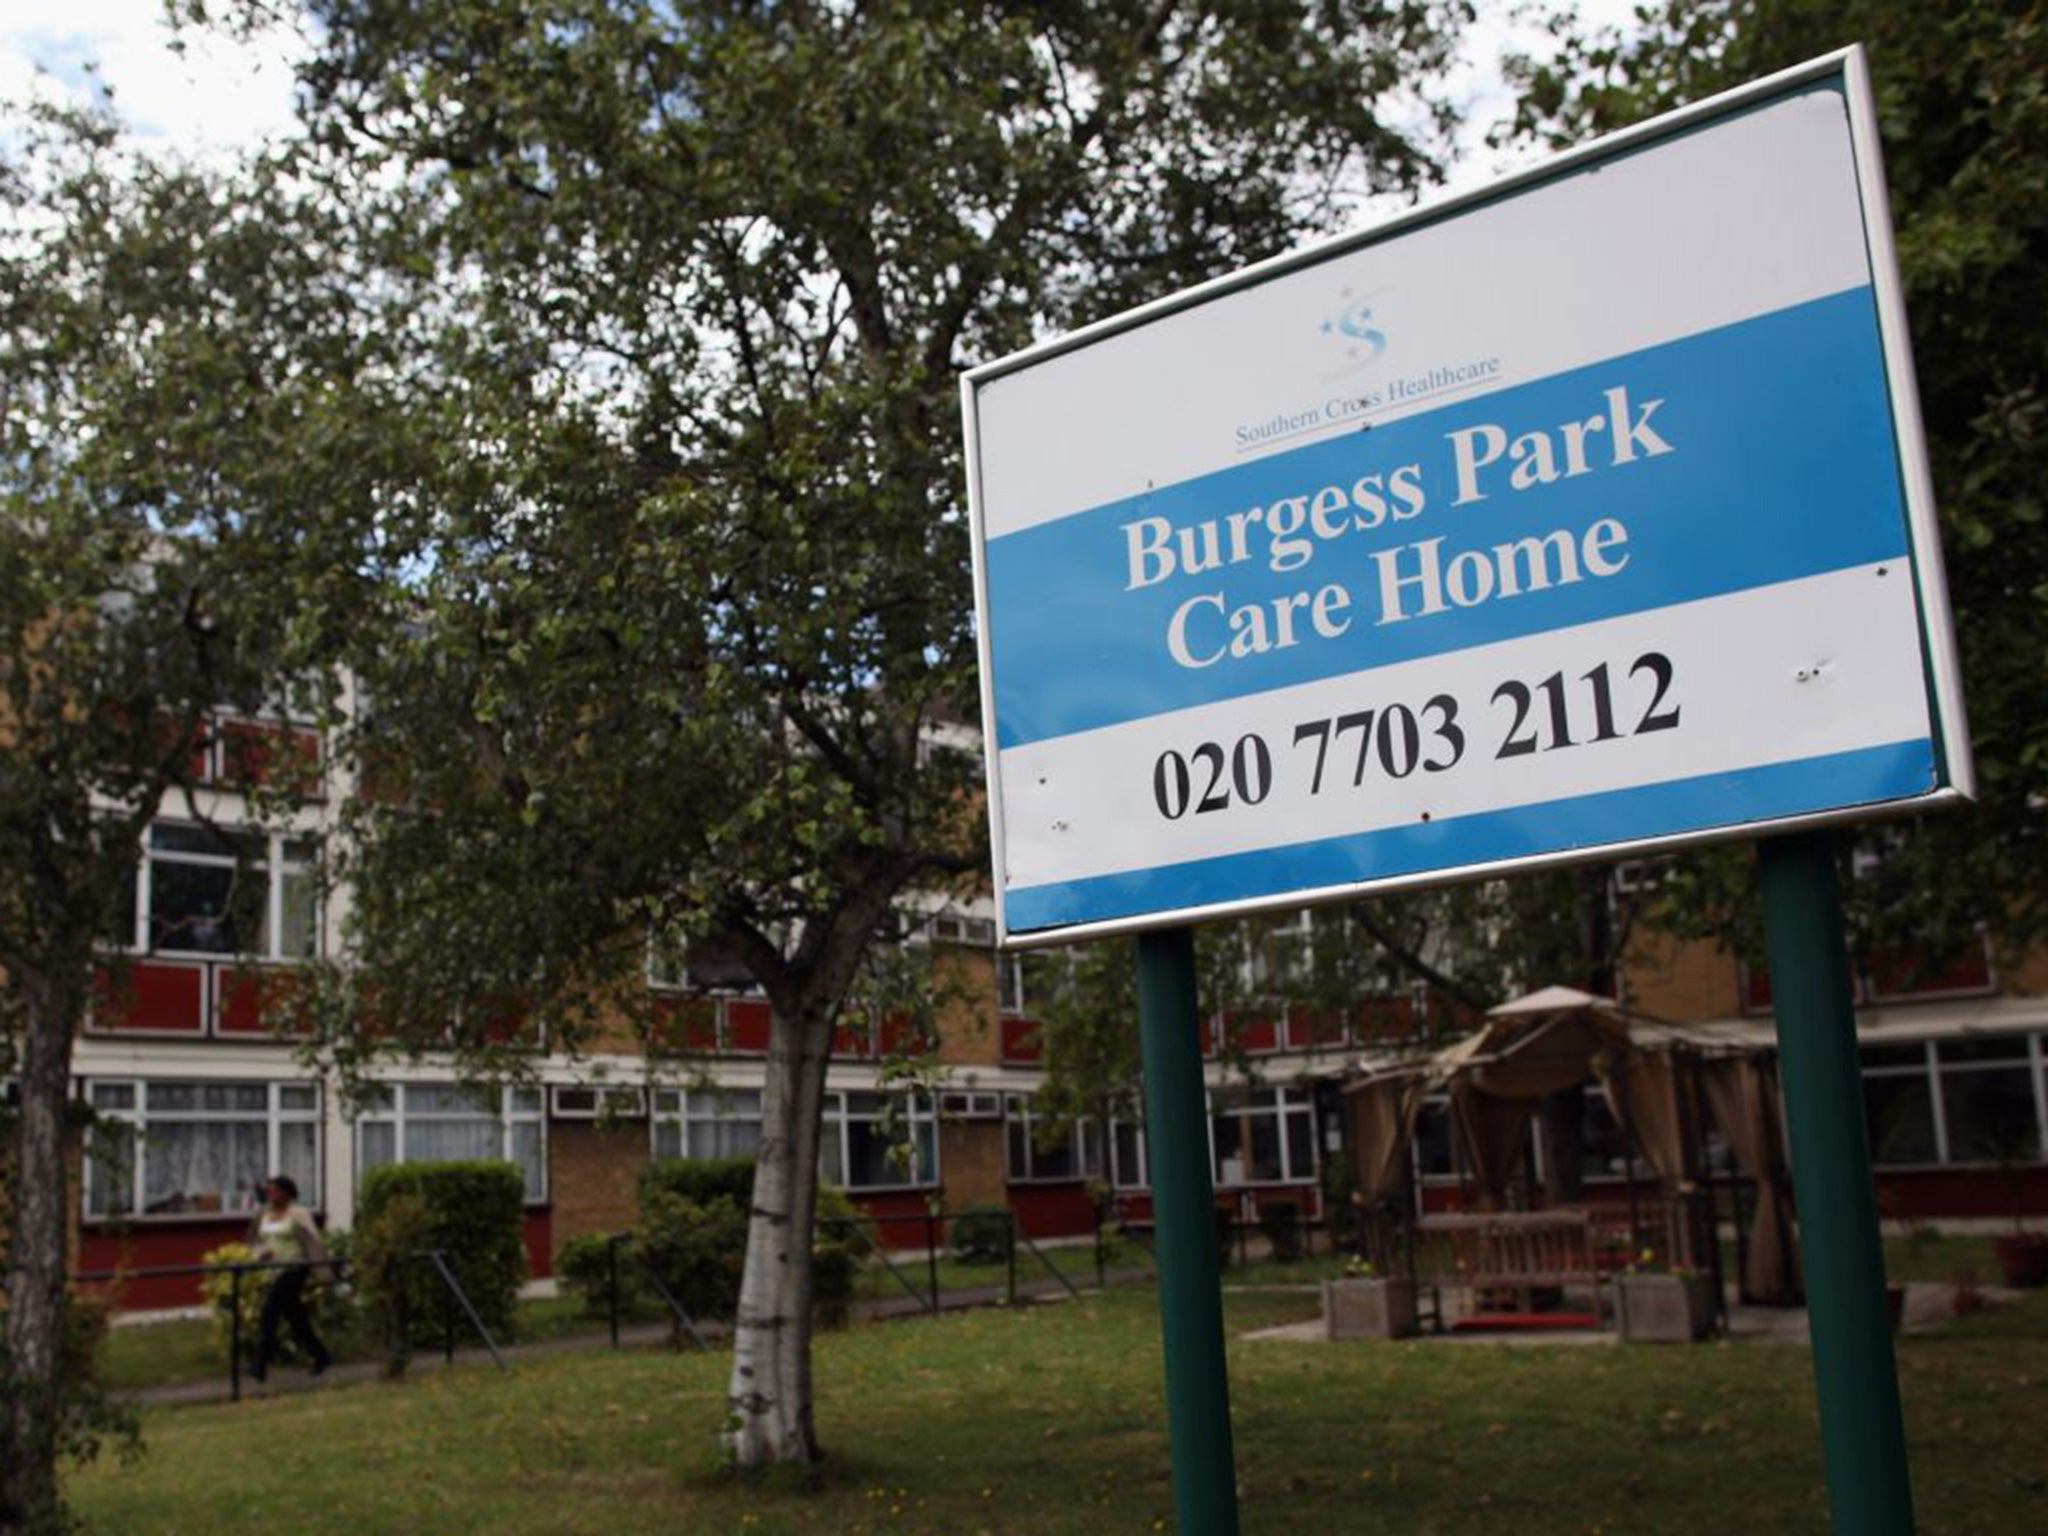 The Burgess Park Care Home which is run by Southern Cross,